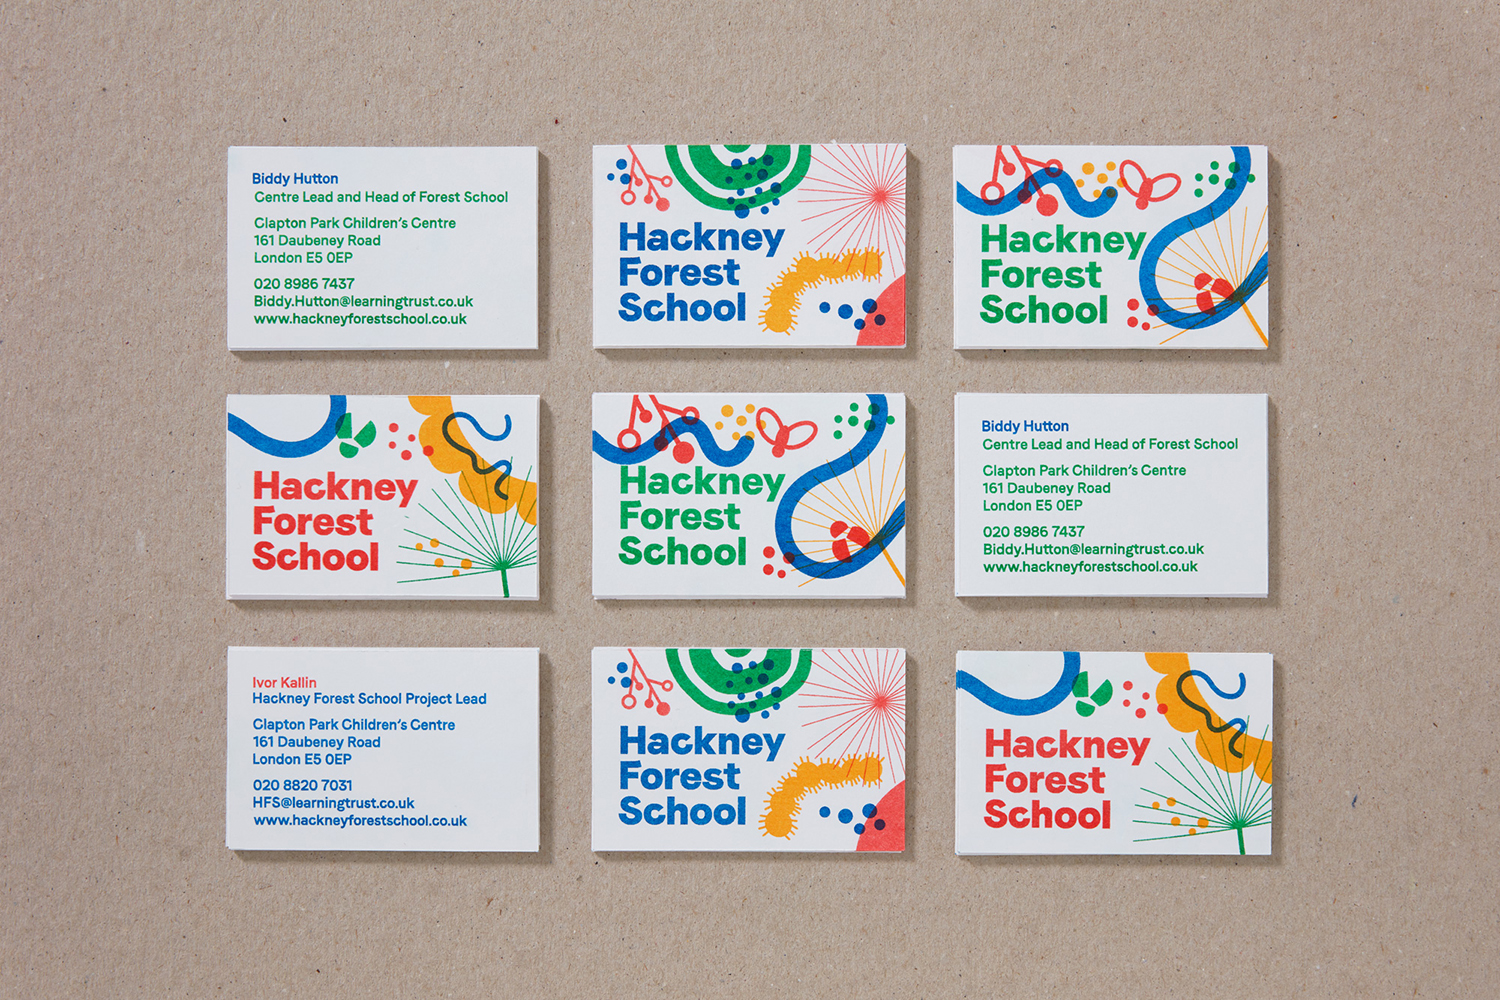 Visual identity and business cards designed by Spy for Hackney Forest School